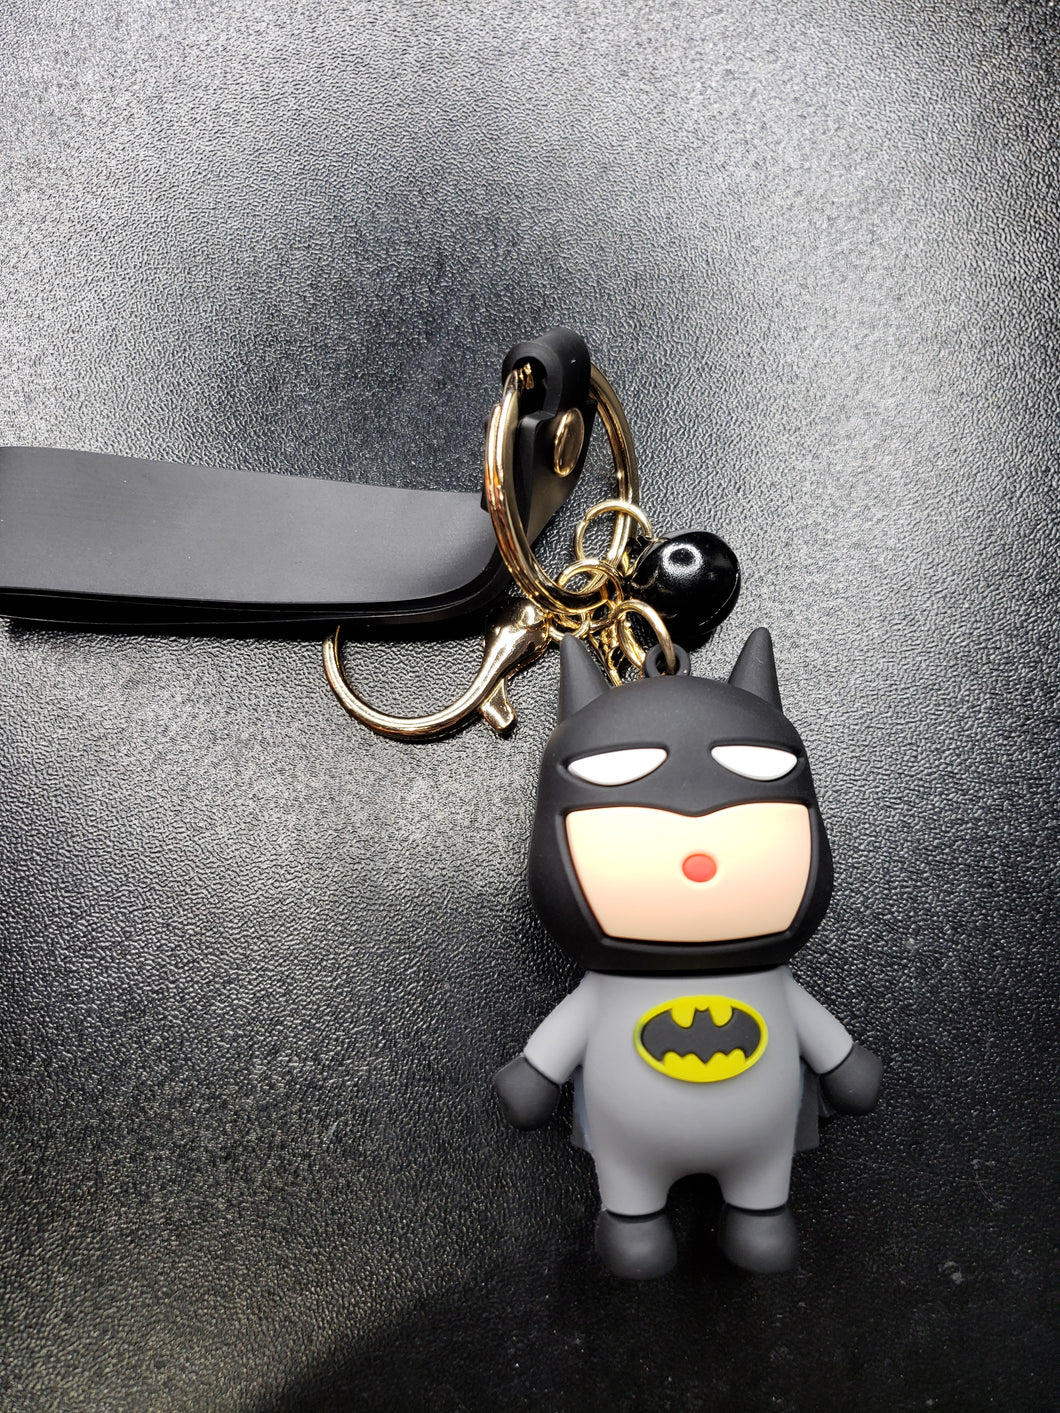 Deluxe keychain with wrist lanyard